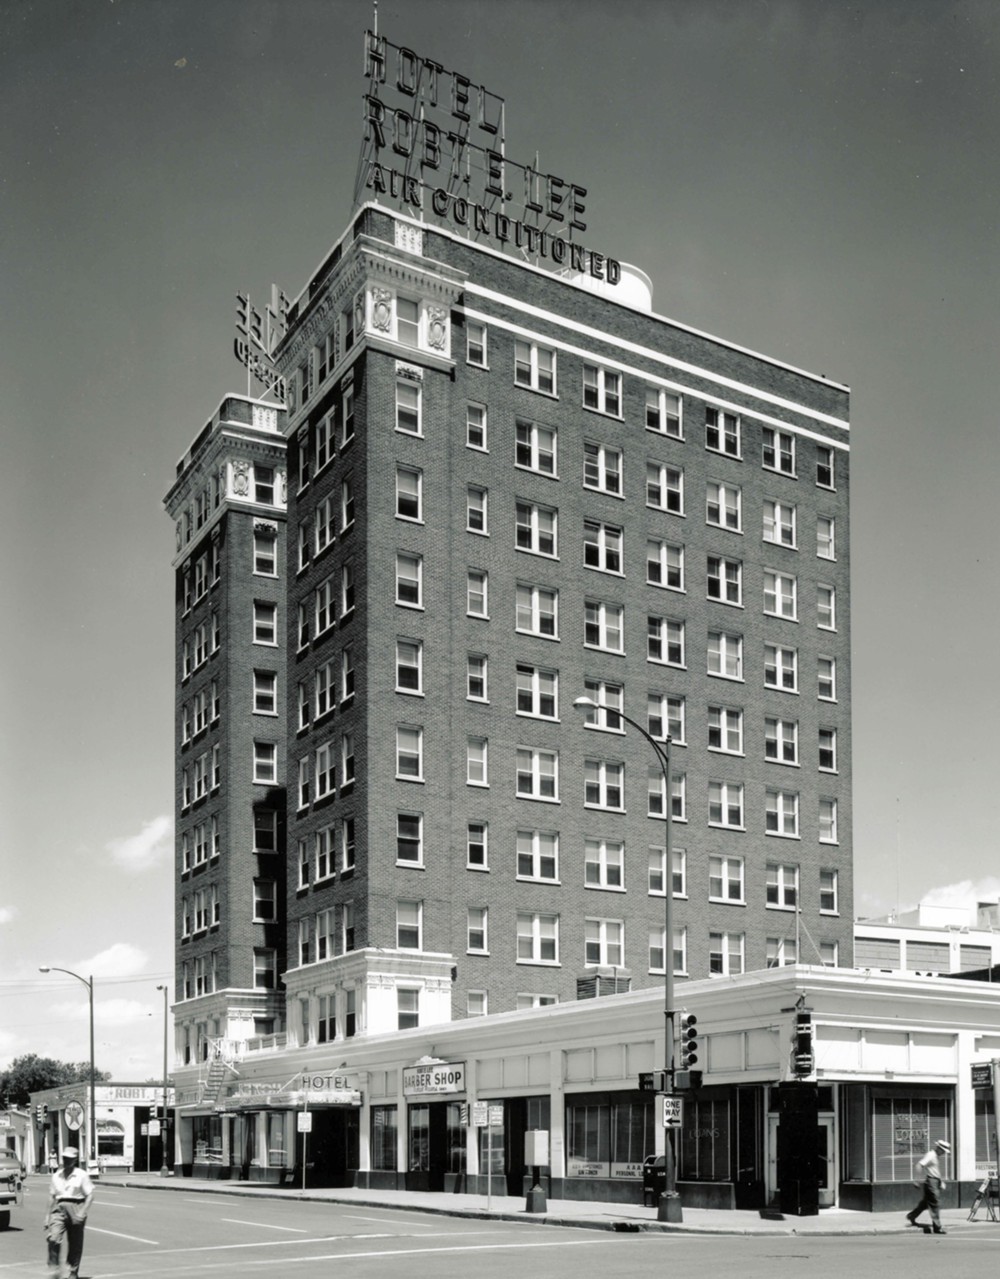 Robert E. Lee Hotel, San Antonio Texas Historic view of south and east elevations (1938)